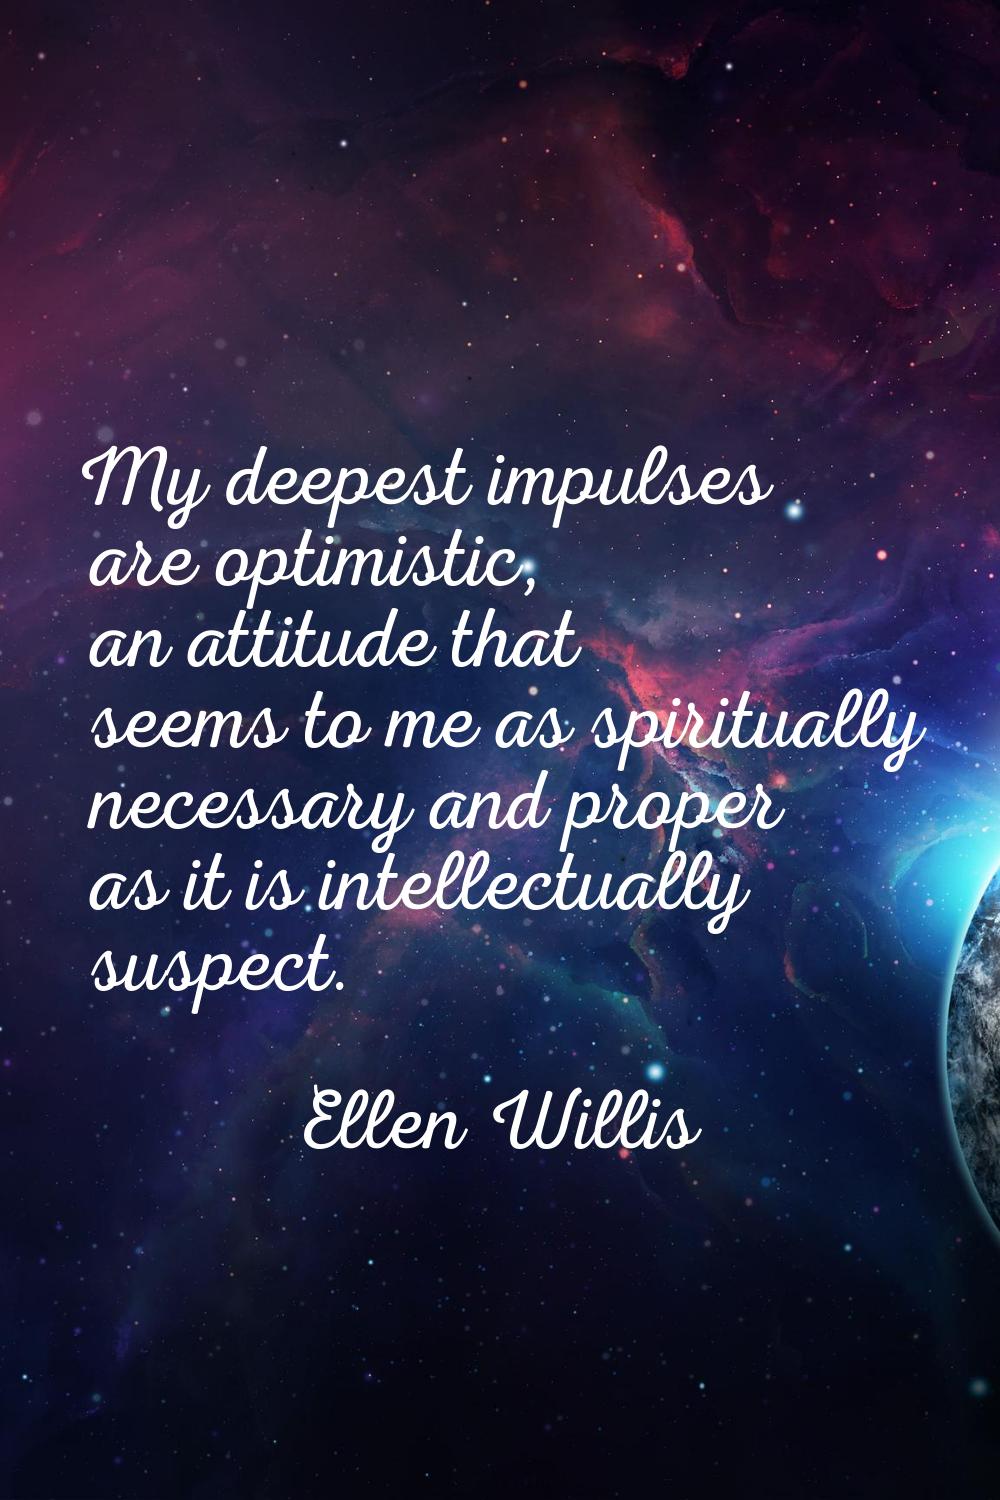 My deepest impulses are optimistic, an attitude that seems to me as spiritually necessary and prope